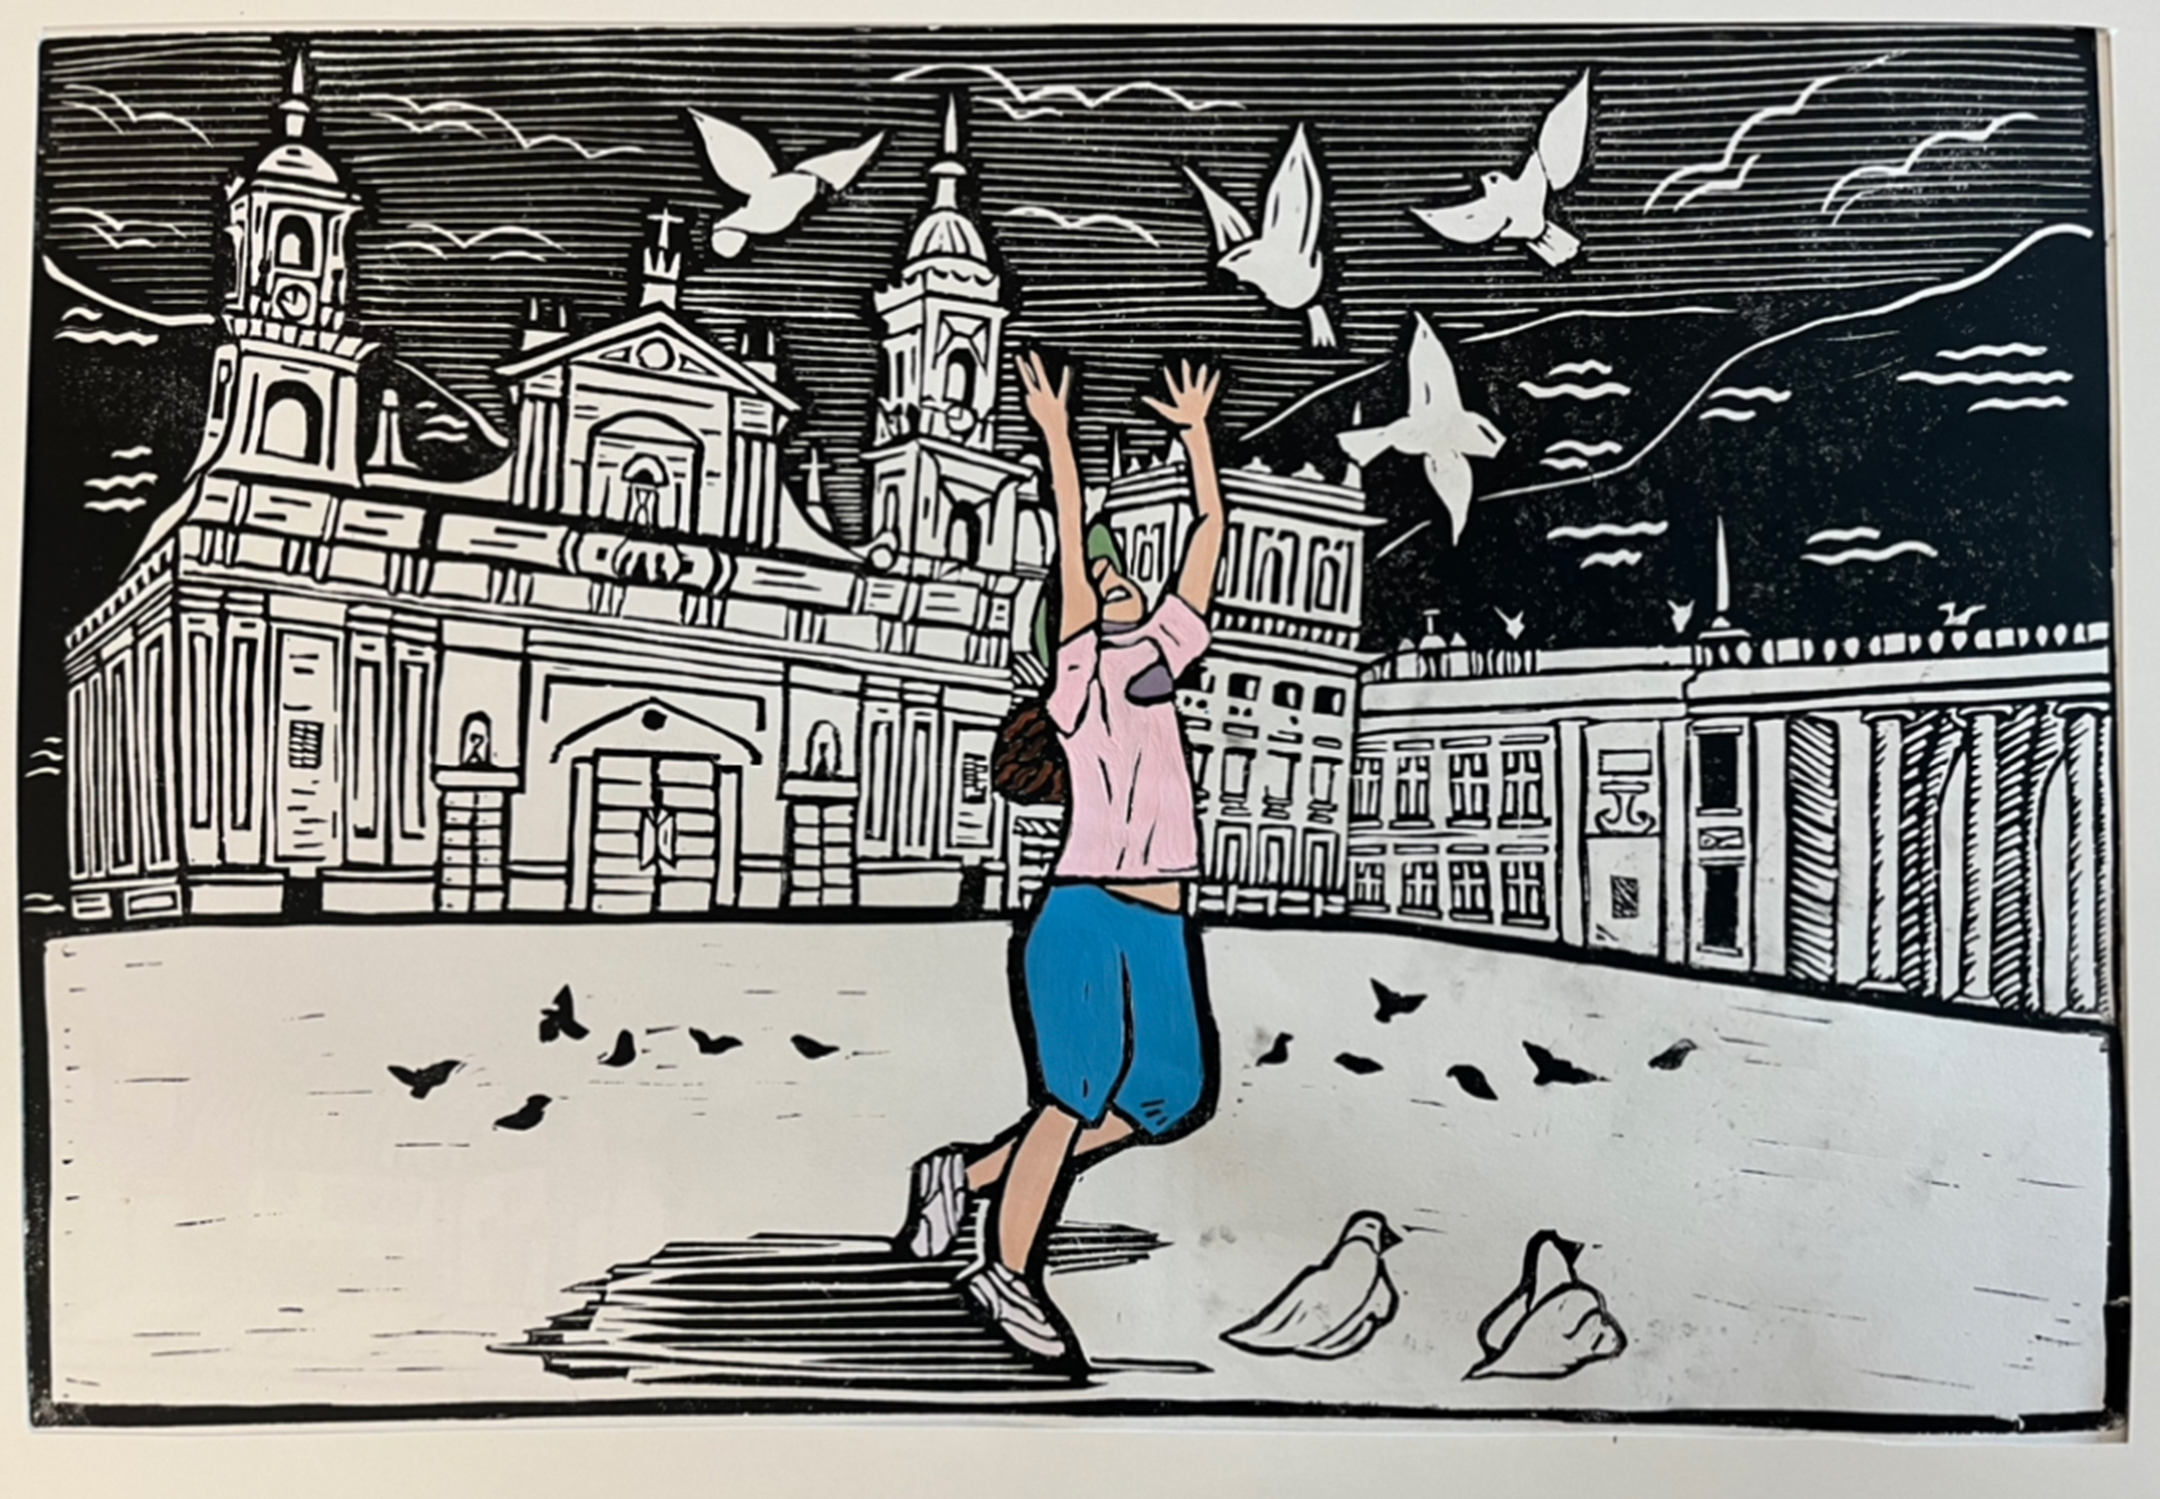 Black and white wood block print of a plaza with a palace in background and a young woman in a pink shirt and blue skirt reaching for white birds in the foreground